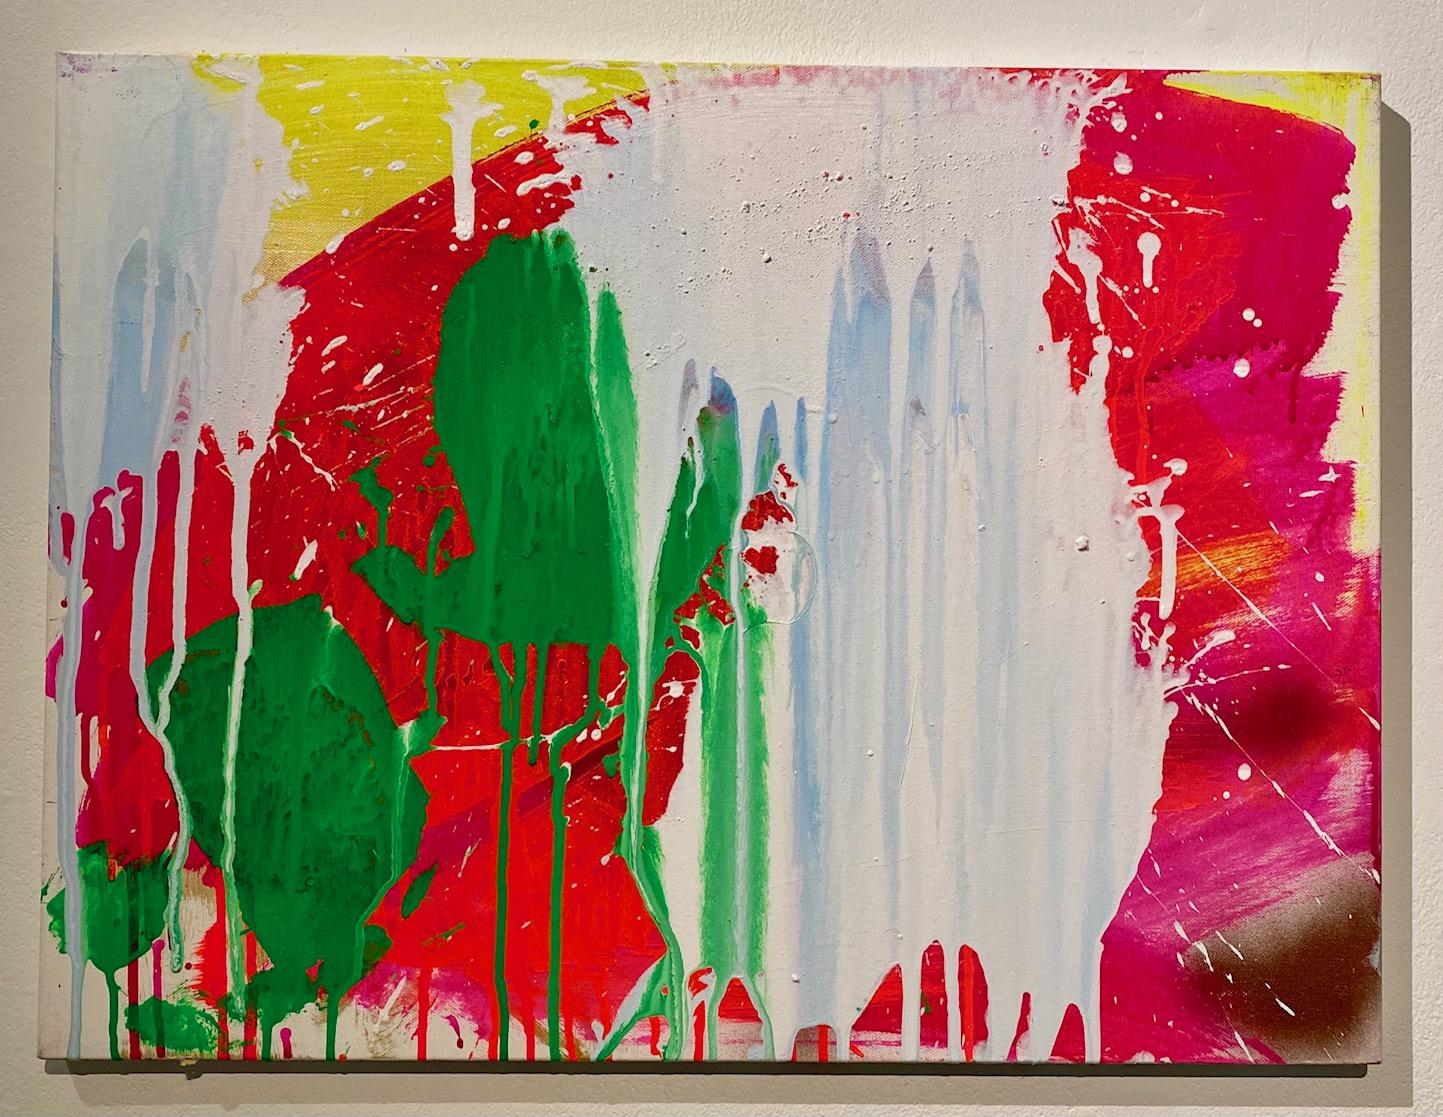 Ushio Shinohara Abstract Painting - "White, Red and Green, " Acrylic Paint on Canvas - Abstract Boxing painting